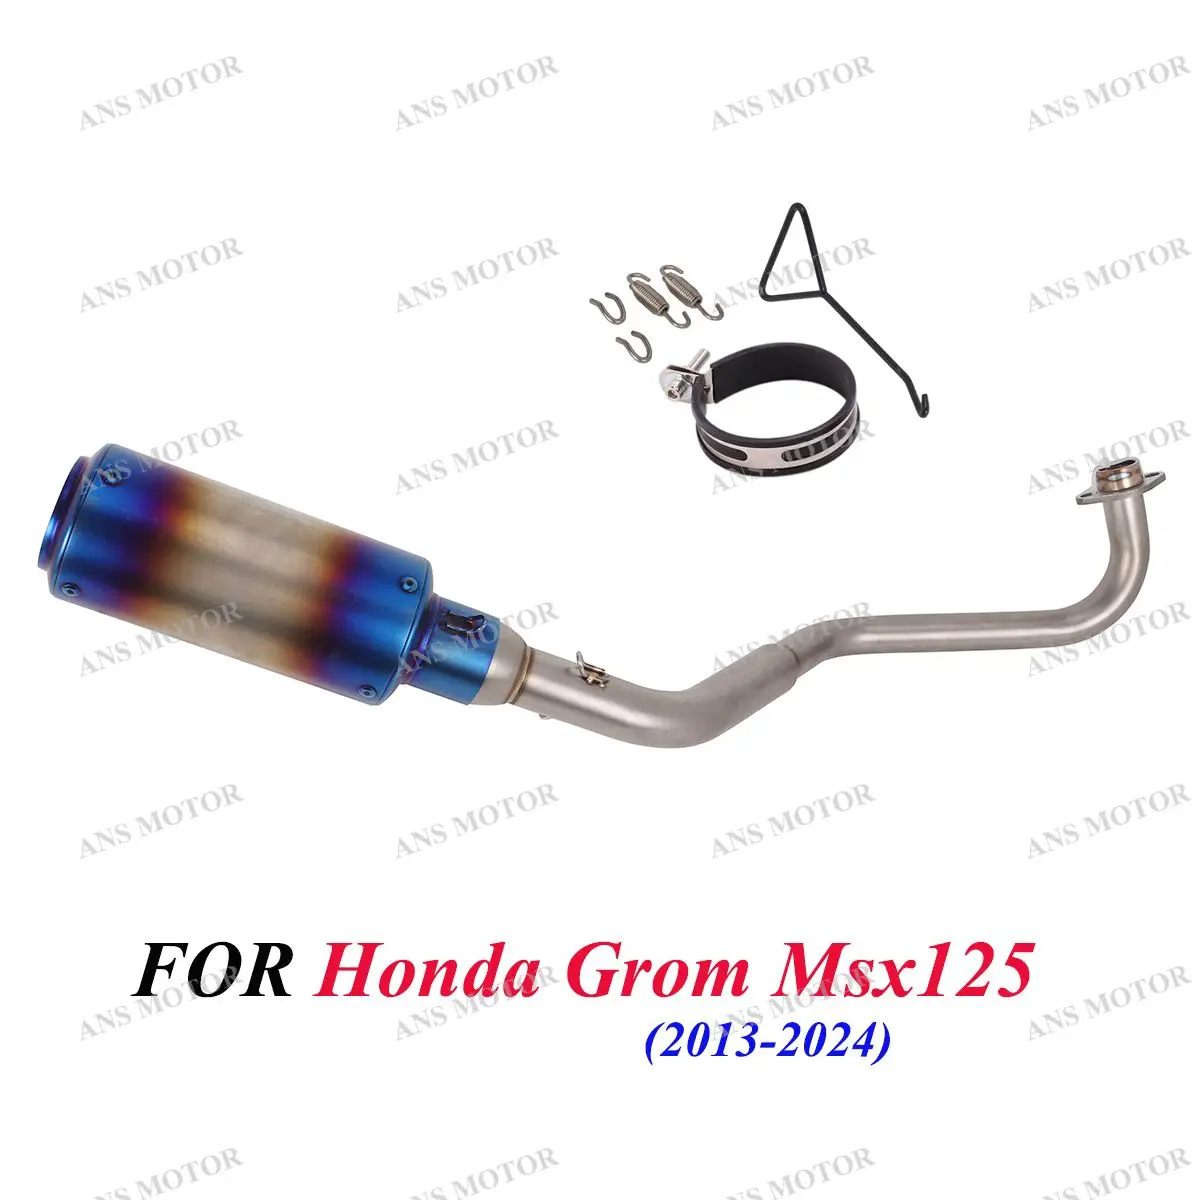 

For Honda Grom Msx125 2013-2022 Complete Exhaust System Motorcycle Eacape Exhaust Slip On Muffler With Removable DB Killer